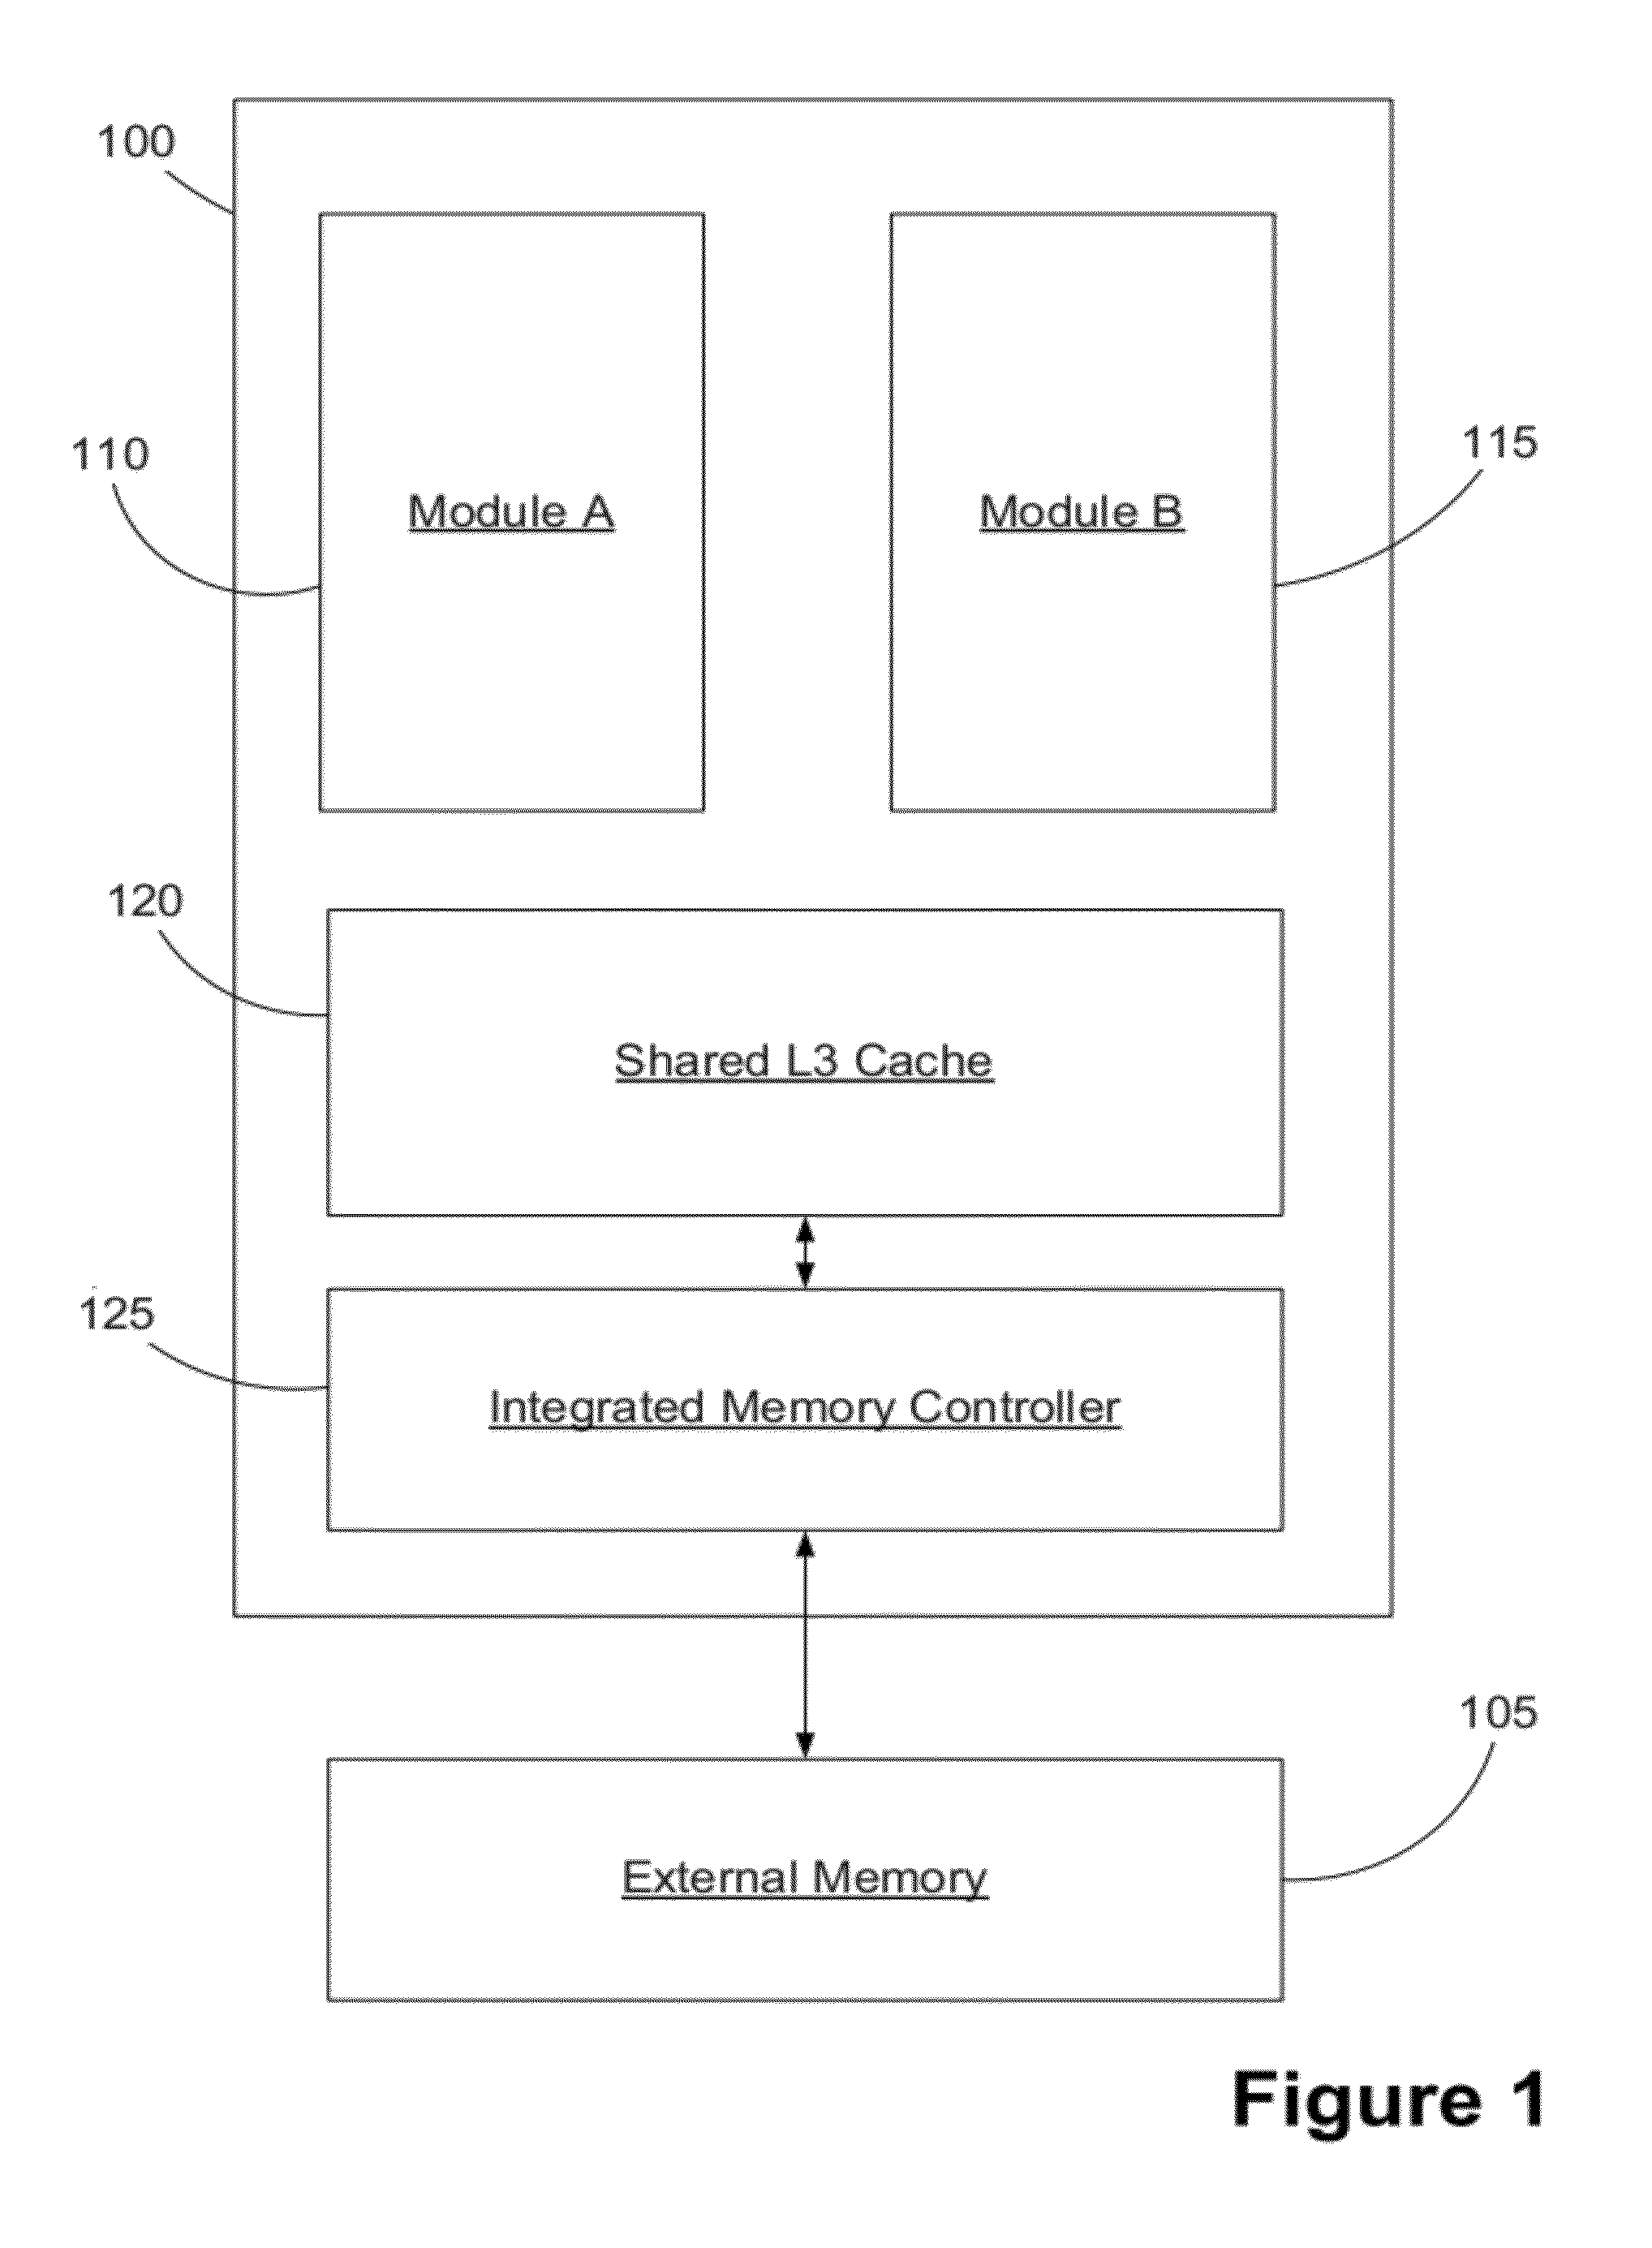 Compiler support technique for hardware transactional memory systems